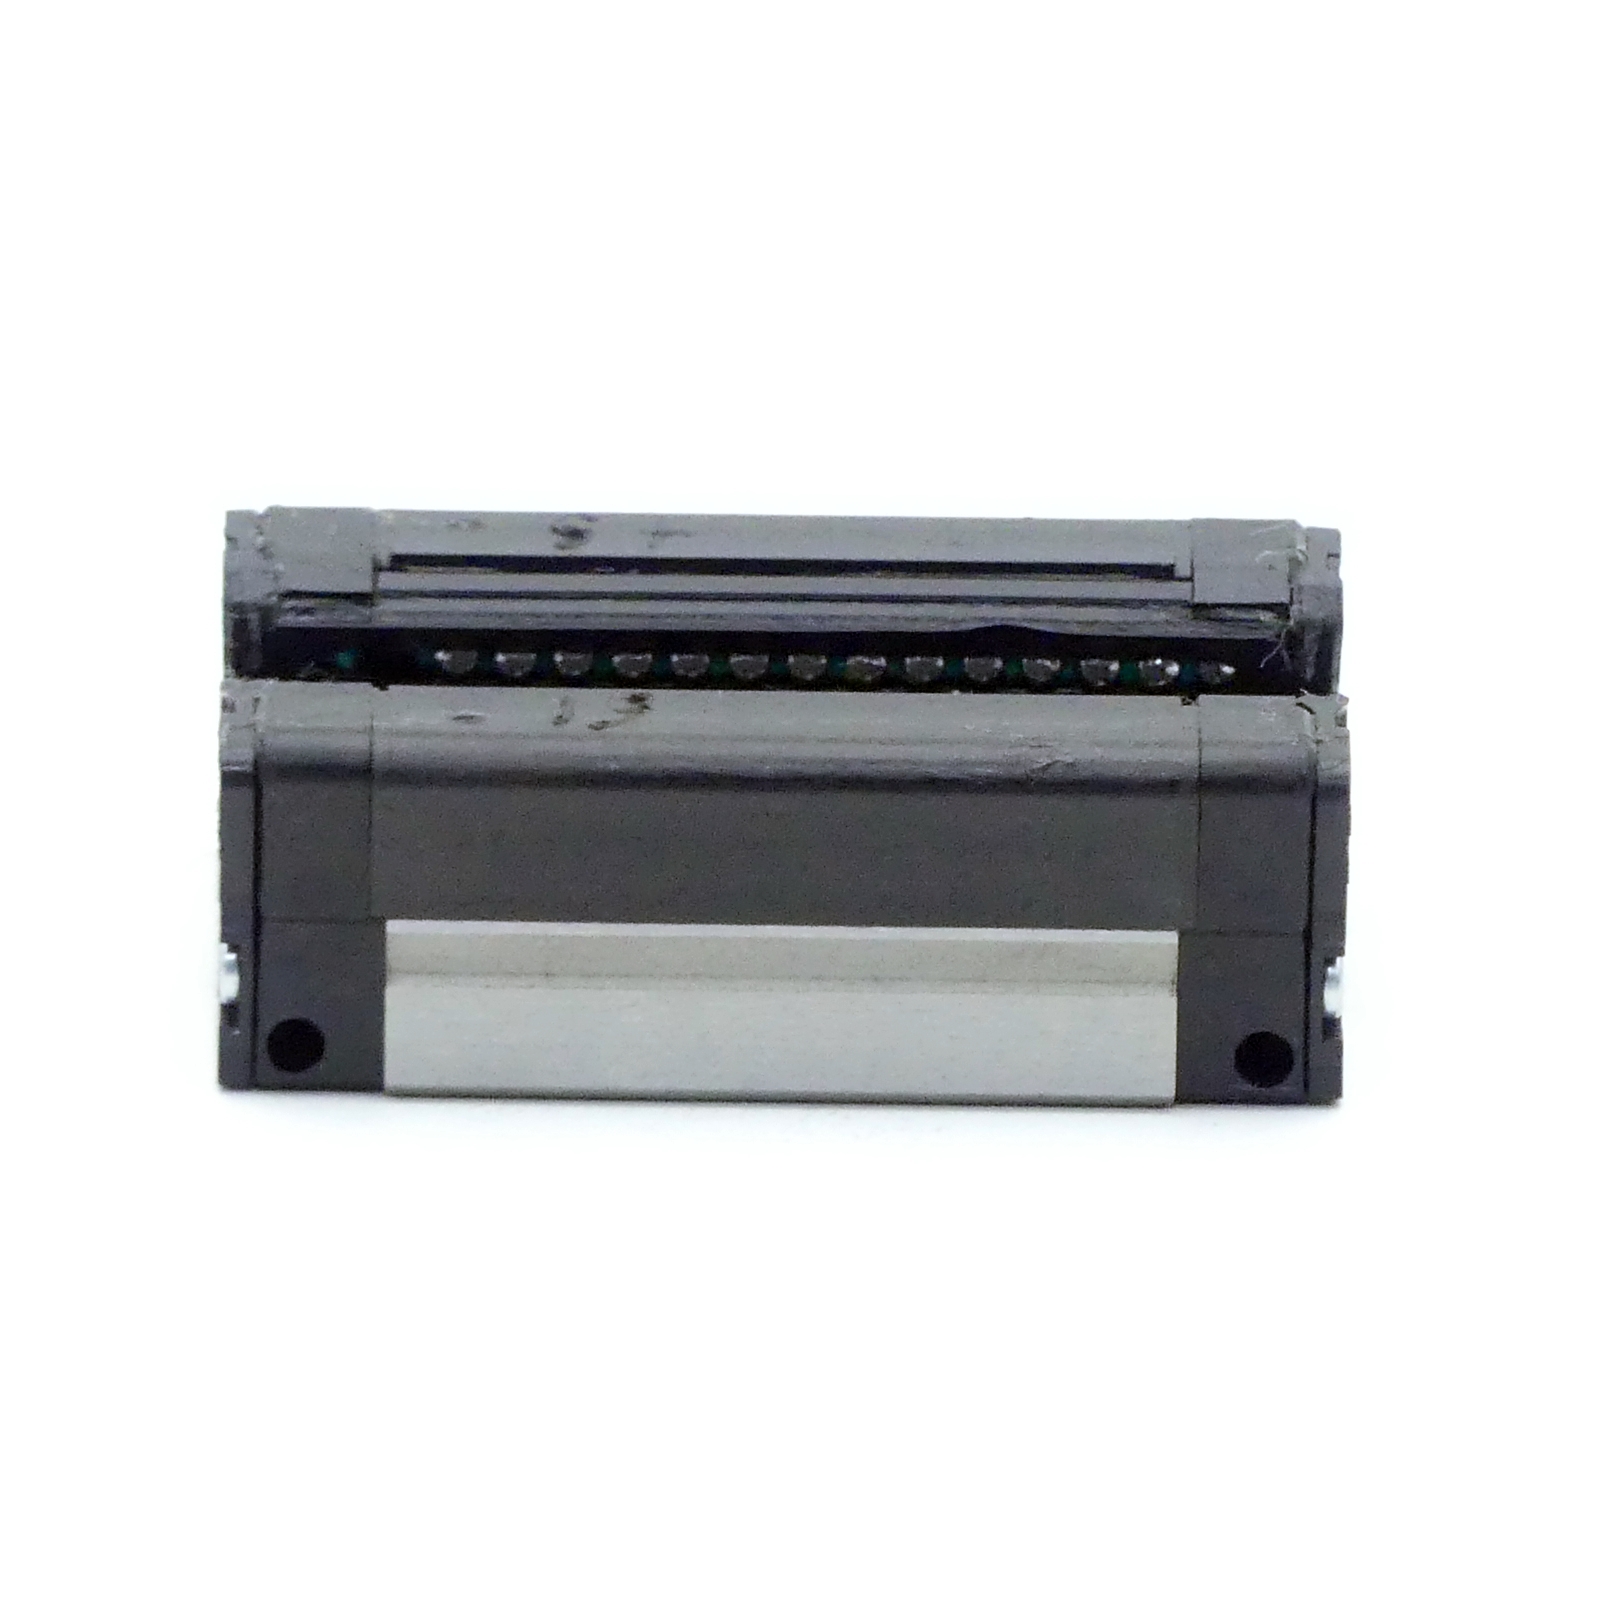 Linear guide carriage 